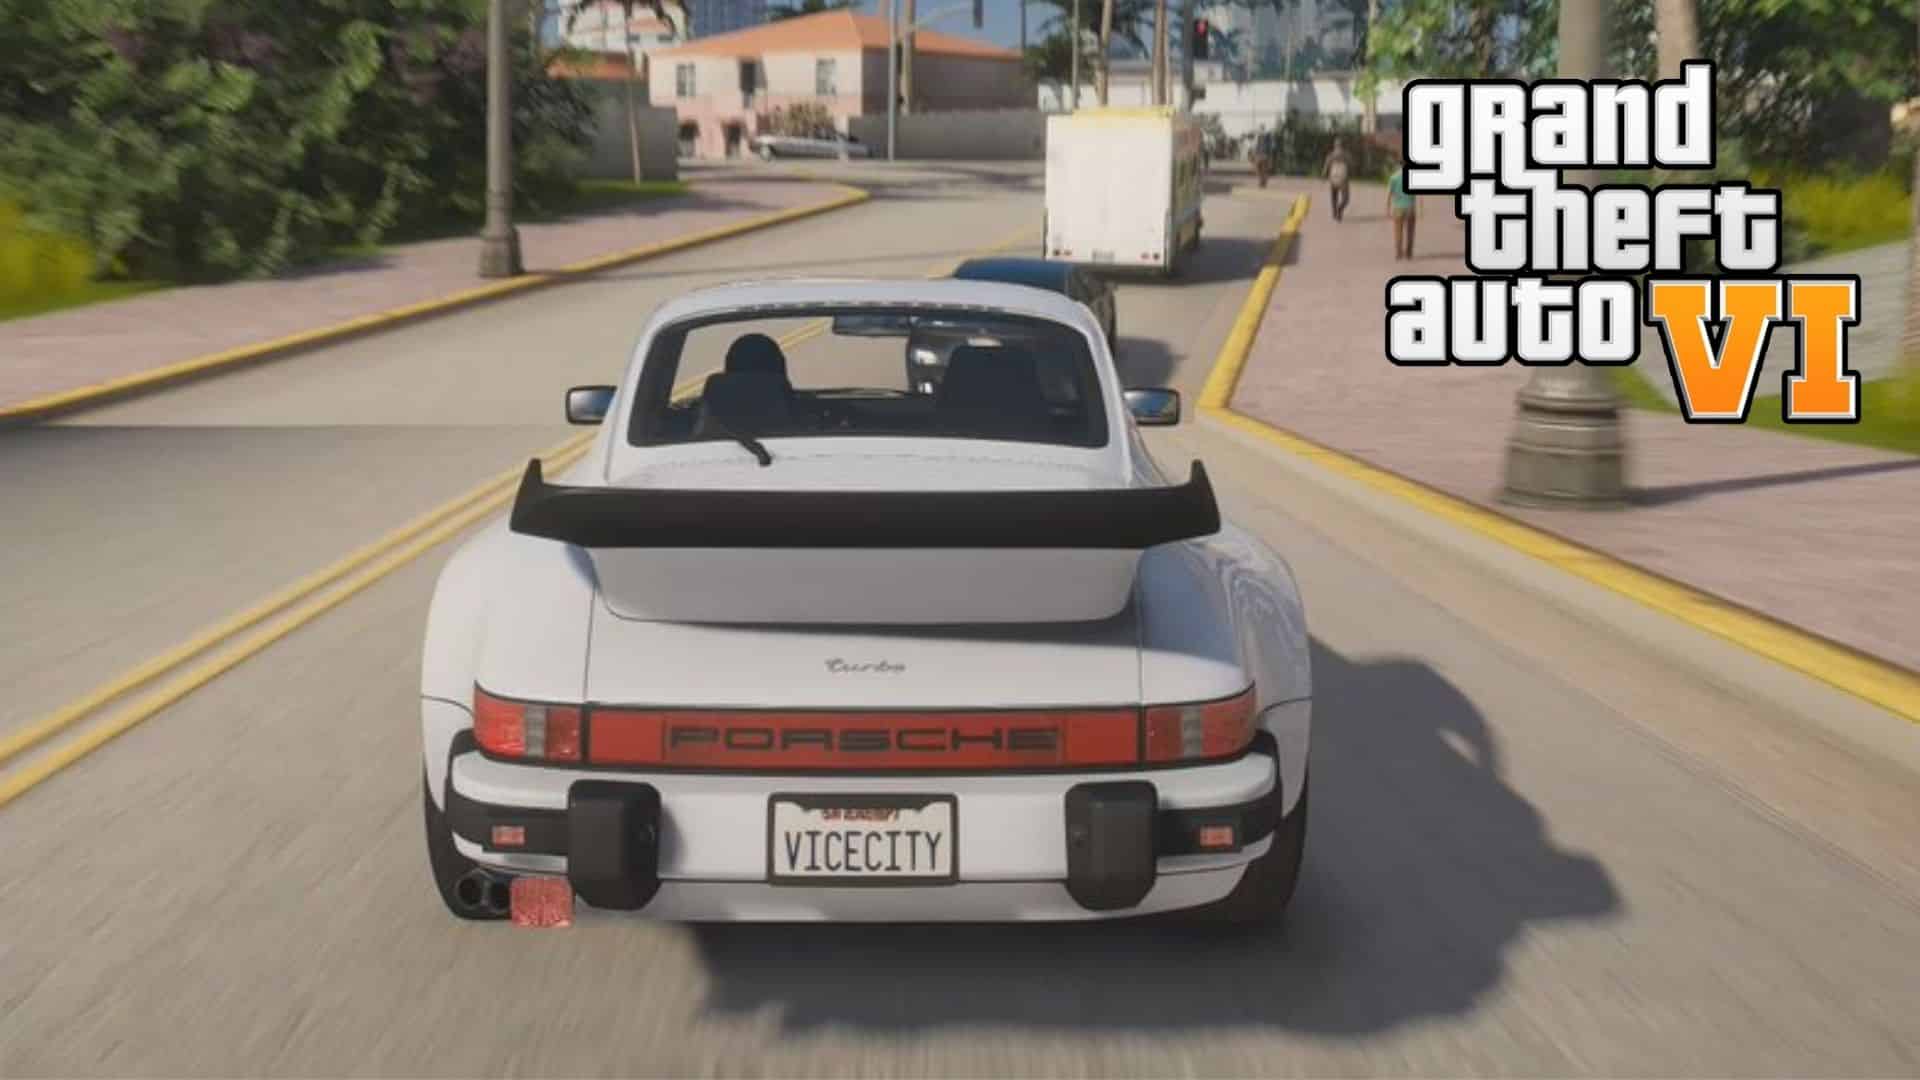 GTA 6 source gives new update on leaked Vice City map and activities -  Dexerto